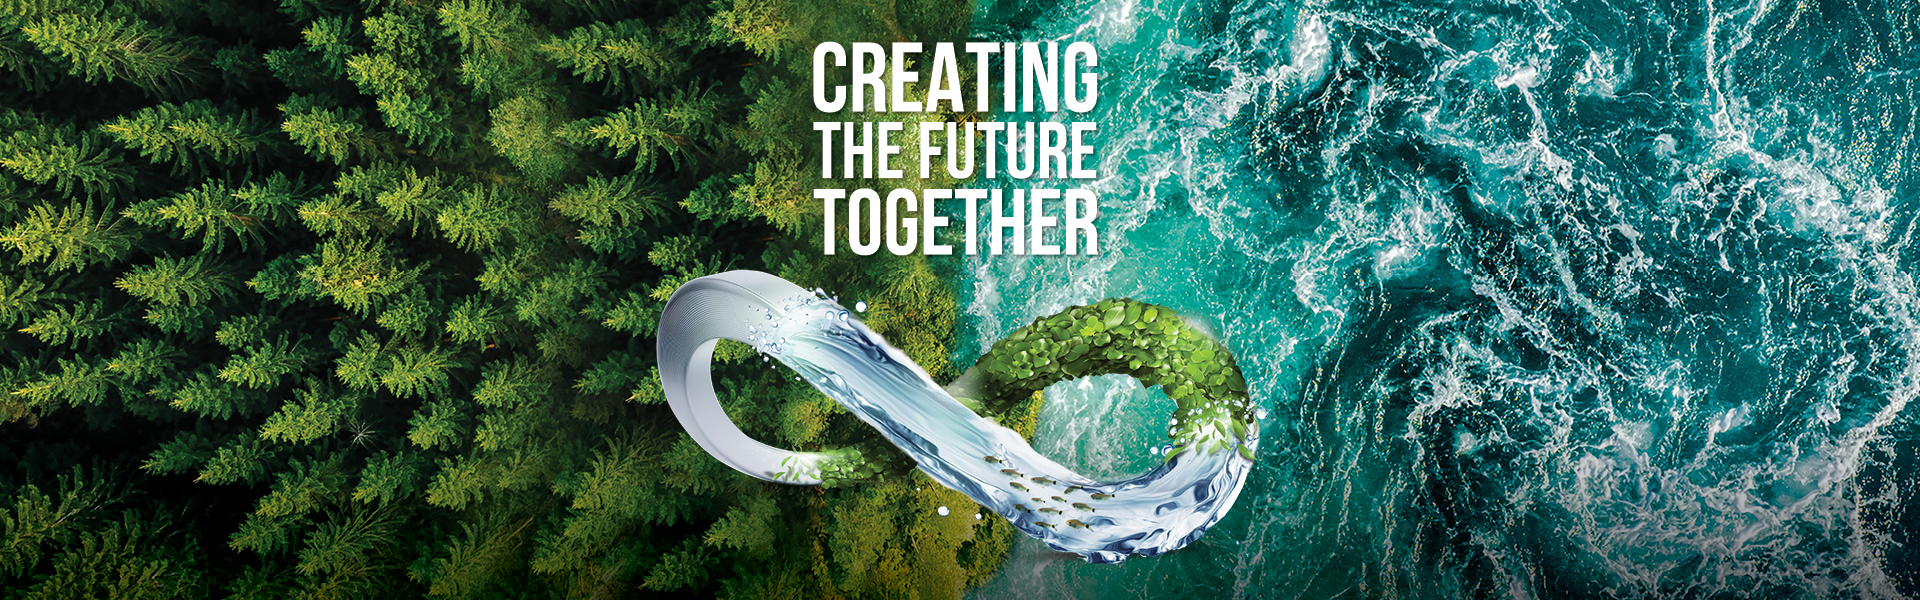 Creating the future together